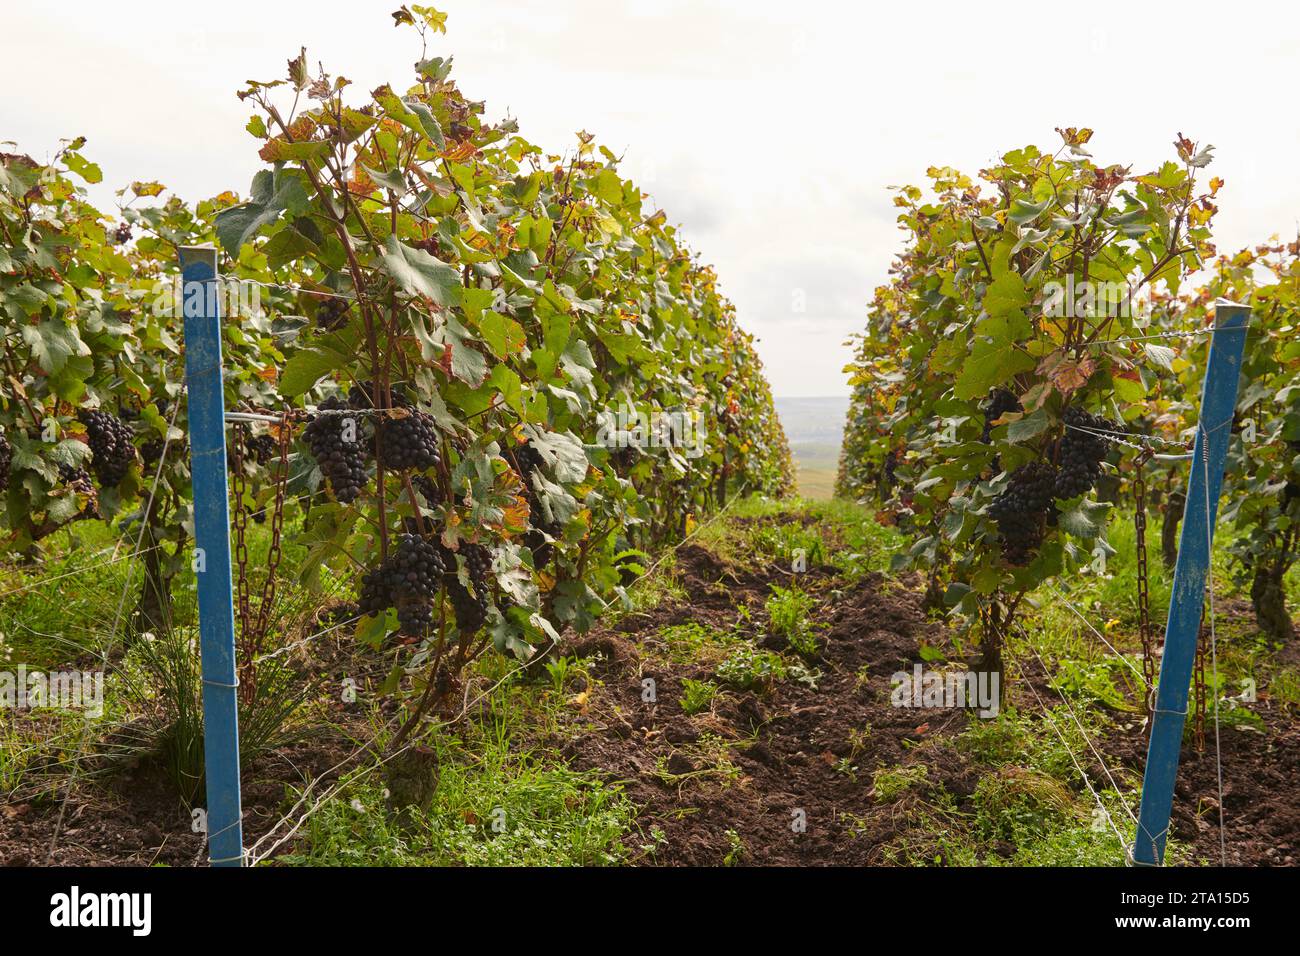 A view of the champagne vines of Champillon looking towards Epernay Stock Photo